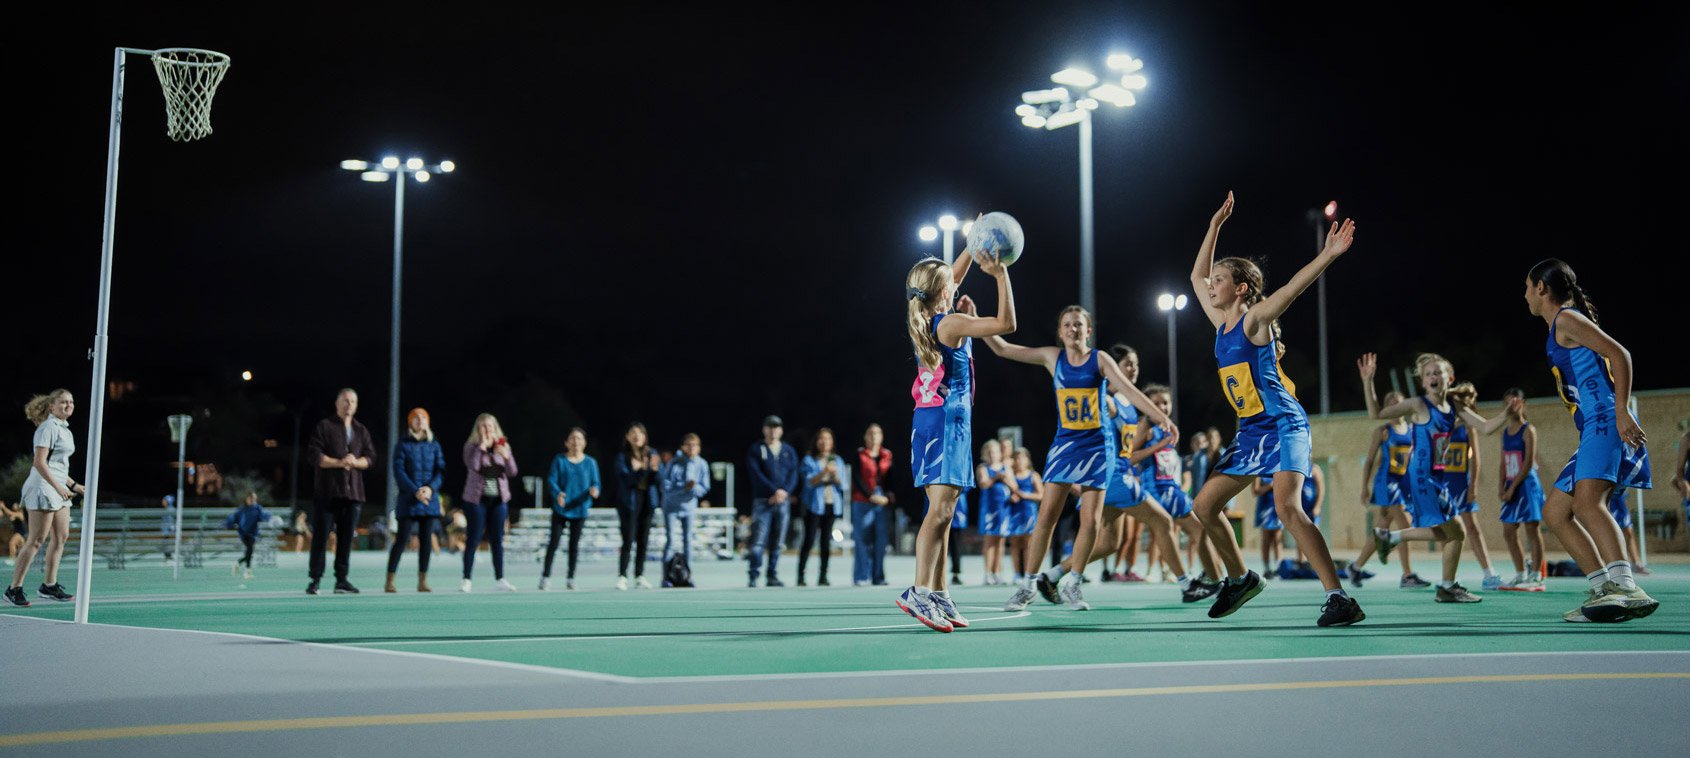 A netball game in progress at night being lit by floodlights with parents watching on the sidelines